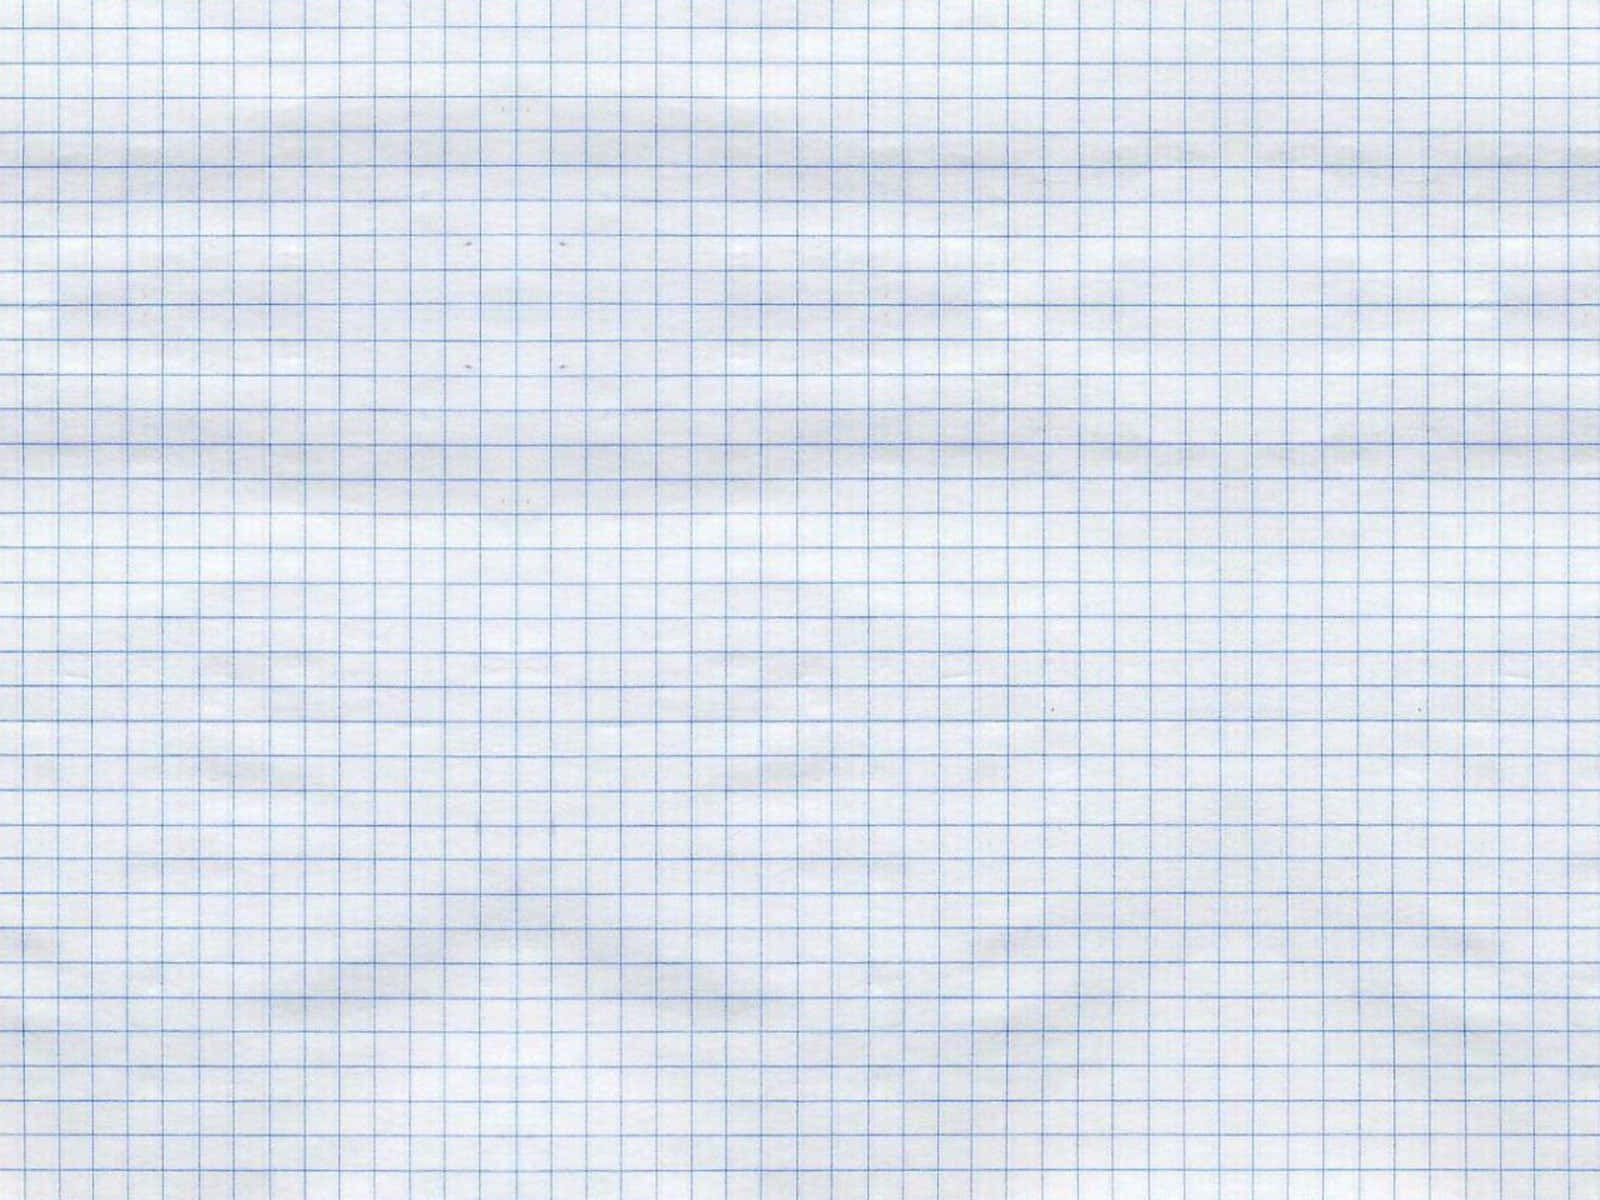 A White Sheet Of Paper With Blue Grid Lines